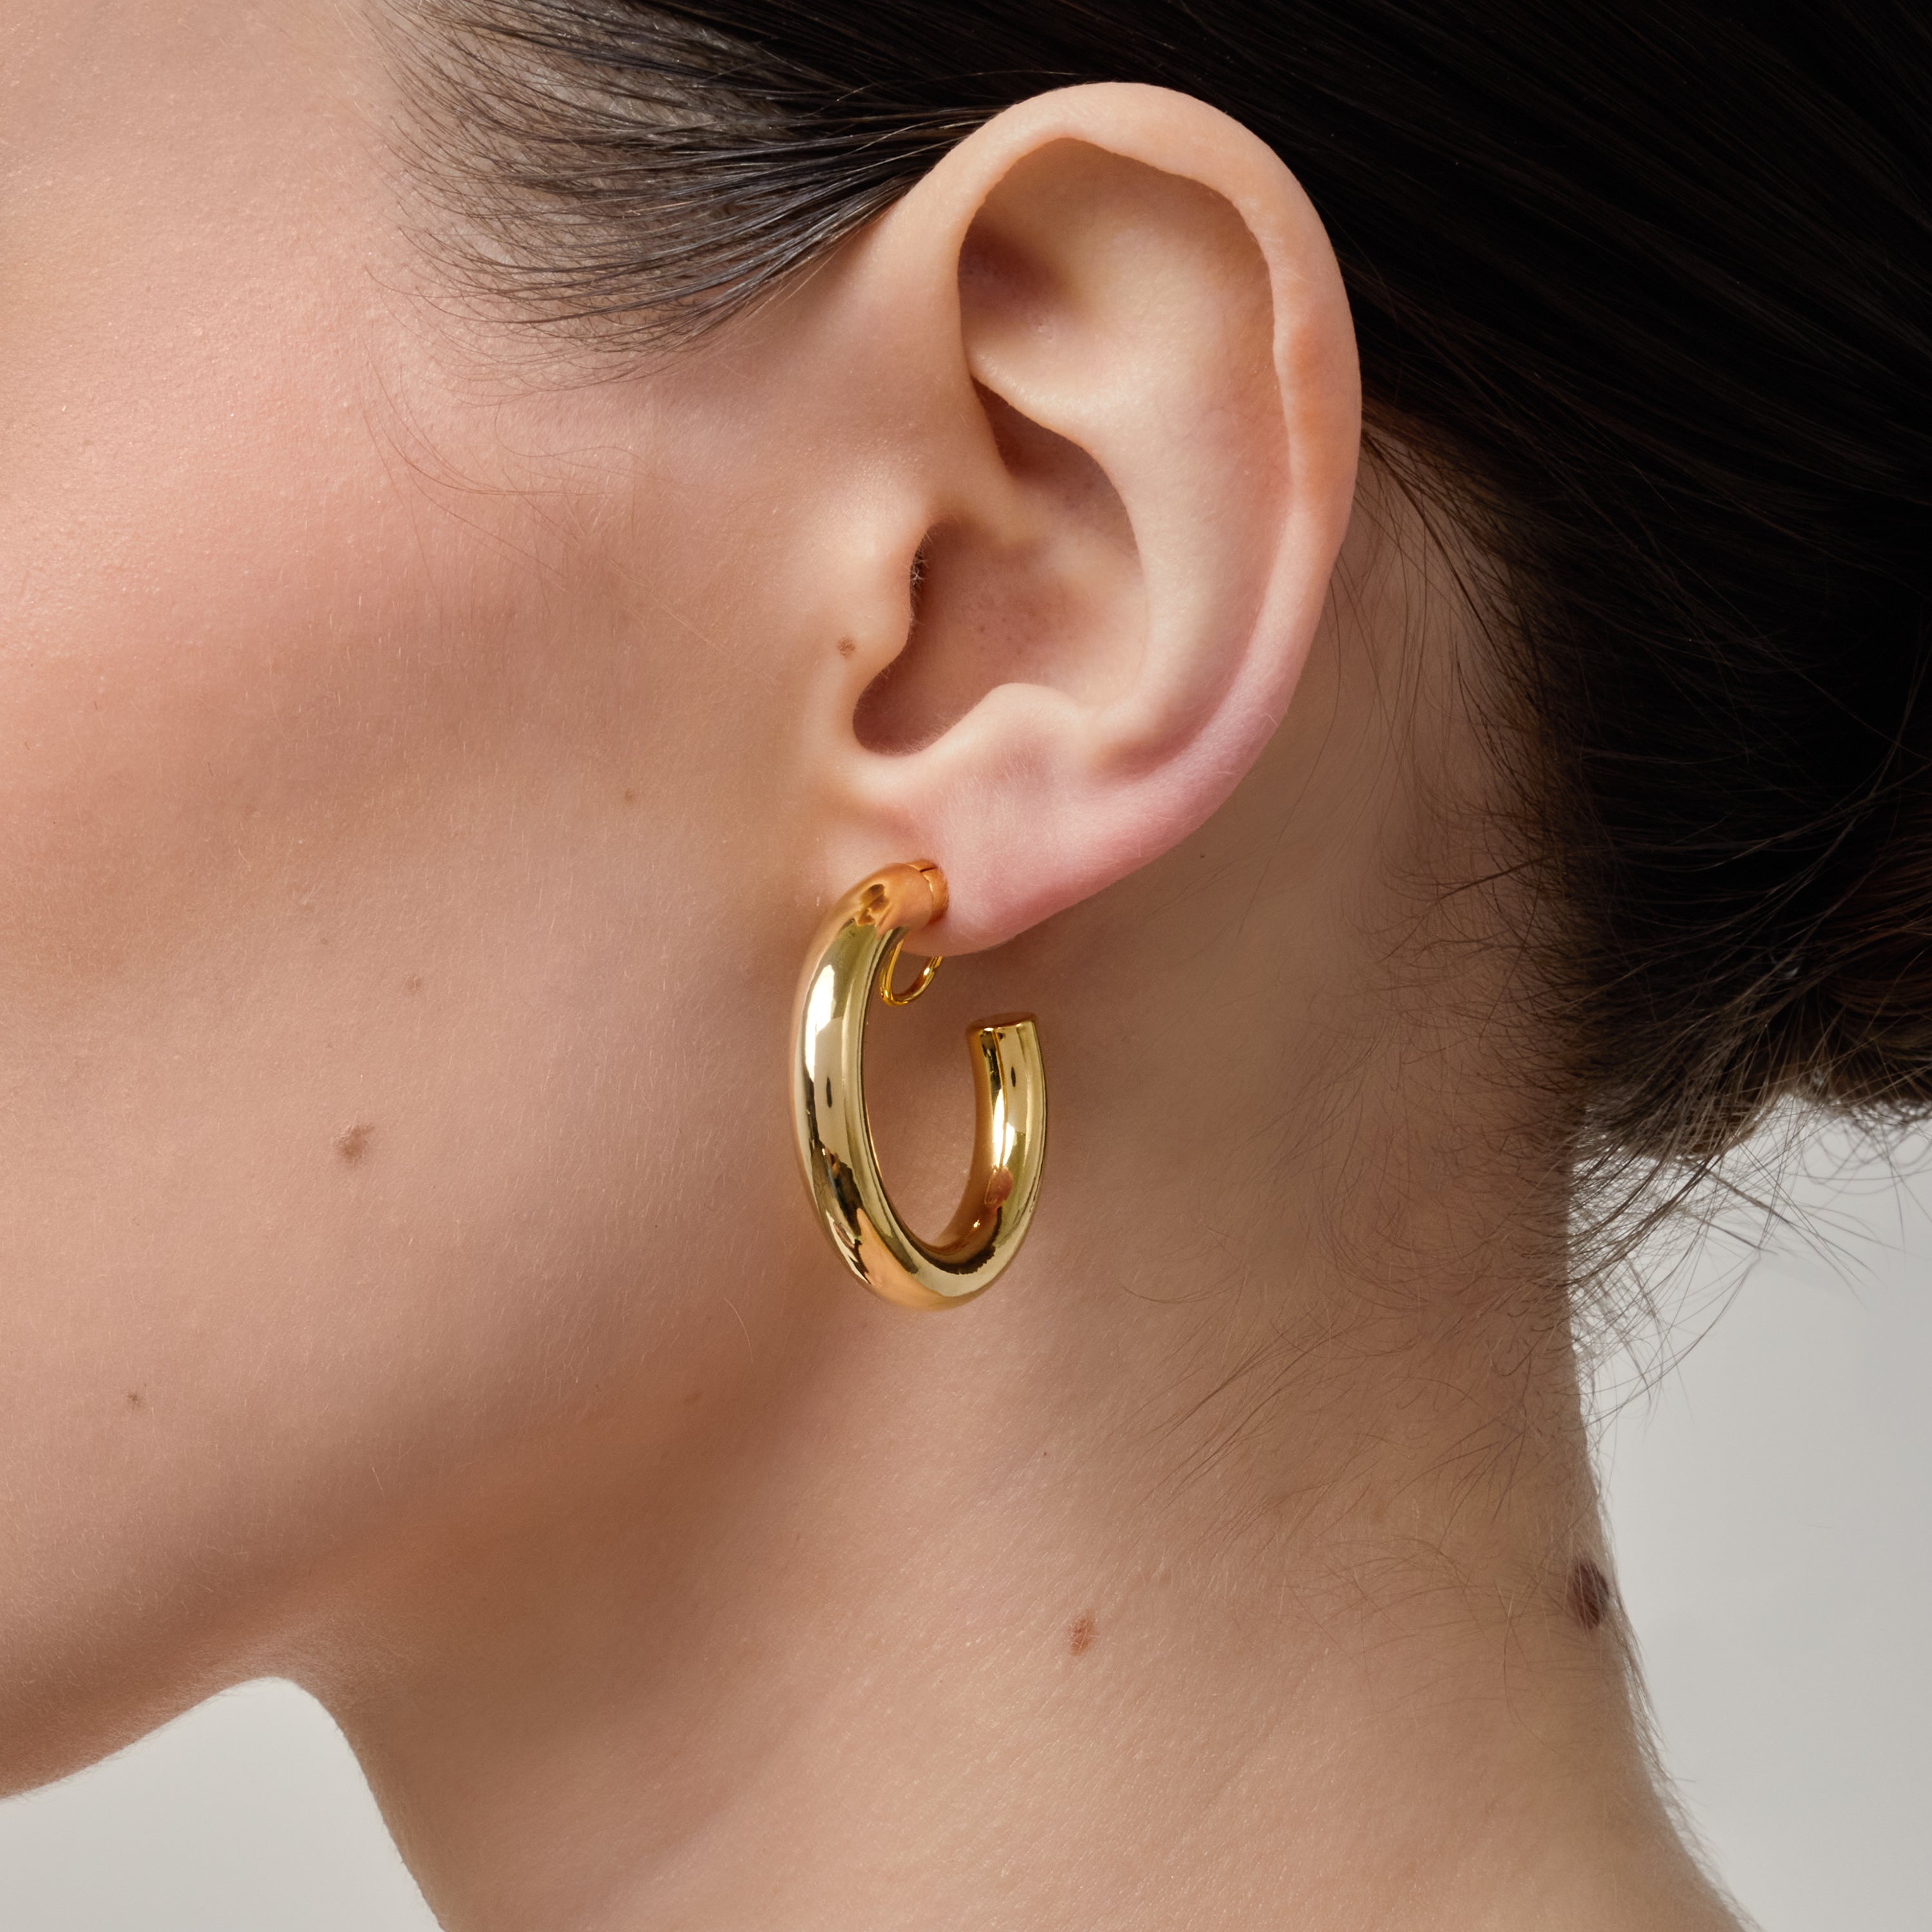 A model wearing the Allie Hoop Clip On Earrings in Gold, which are perfect for all ear types. The Mosquito Coil Clip-On Closure is suitable for Thick/Large, Sensitive, Small/Thin, Stretched/Healing, and Keloid Prone Ears. Made of a Gold tone copper alloy, each purchase includes one pair.